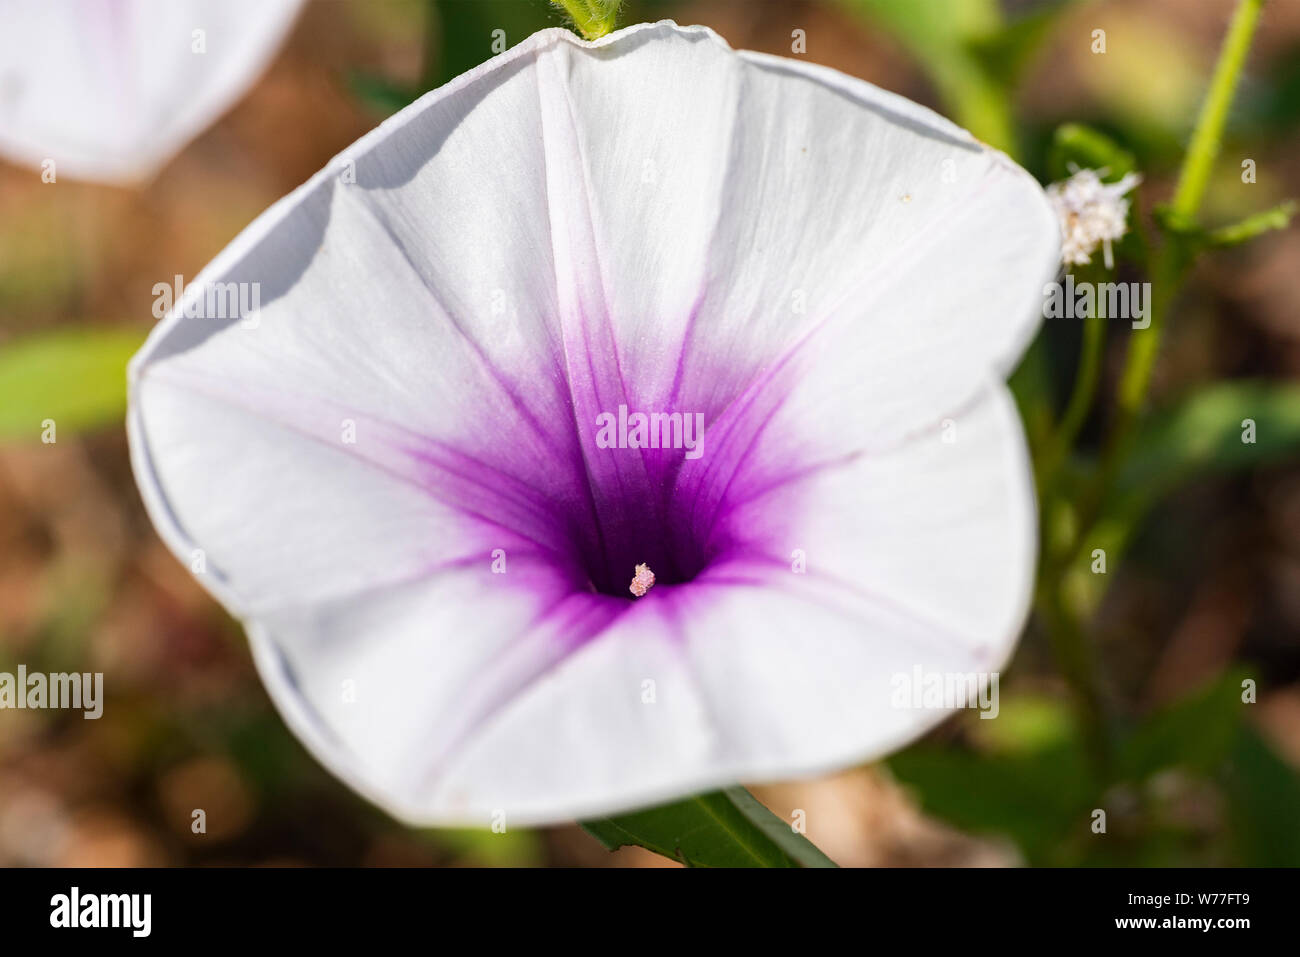 Ipomoea, pink flower, close-up in natural light. Koh Chang Island, Thailand. Stock Photo